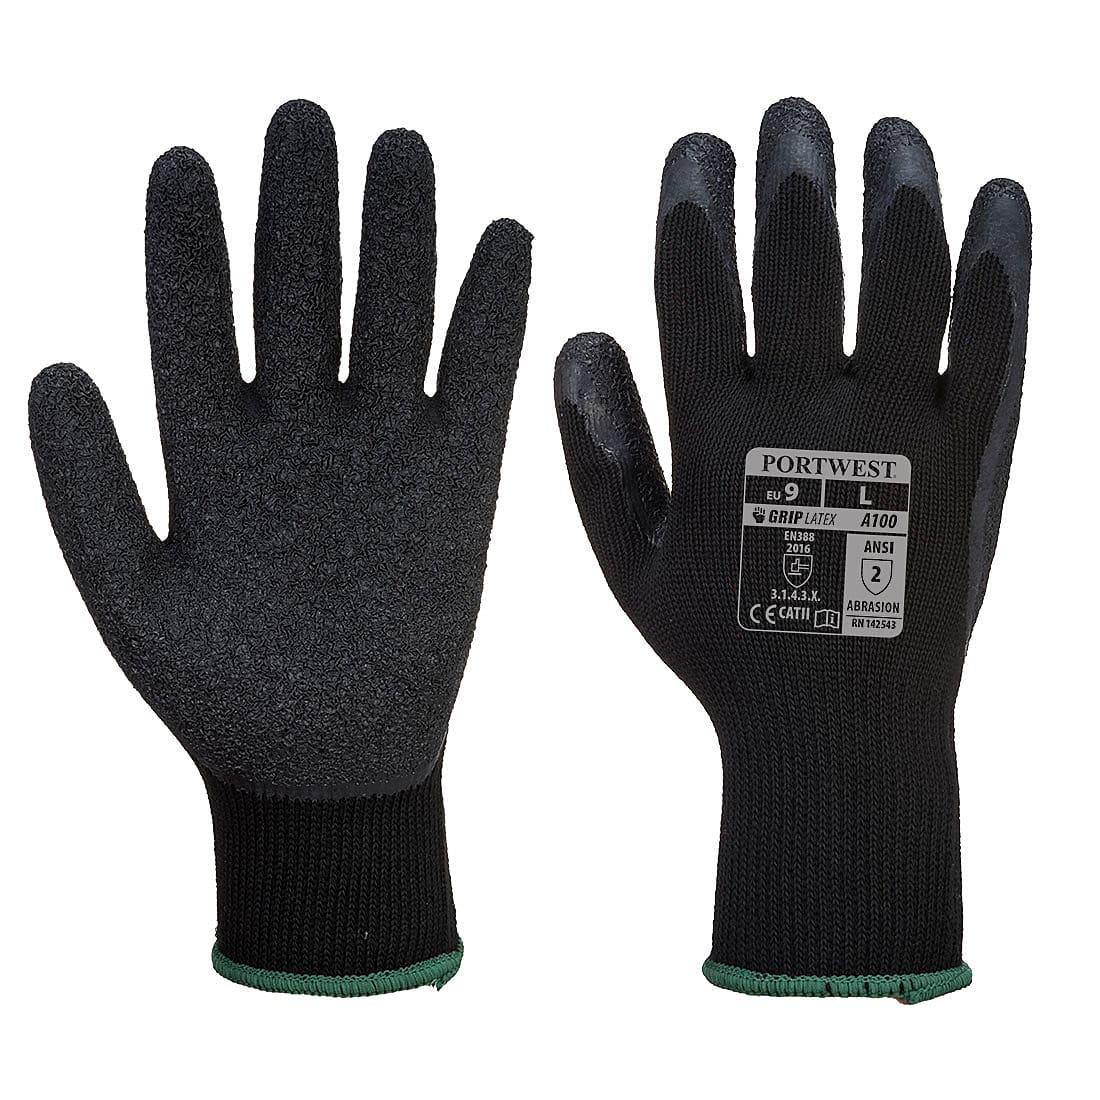 Portwest Grip Gloves - Latex in Black (Product Code: A100)